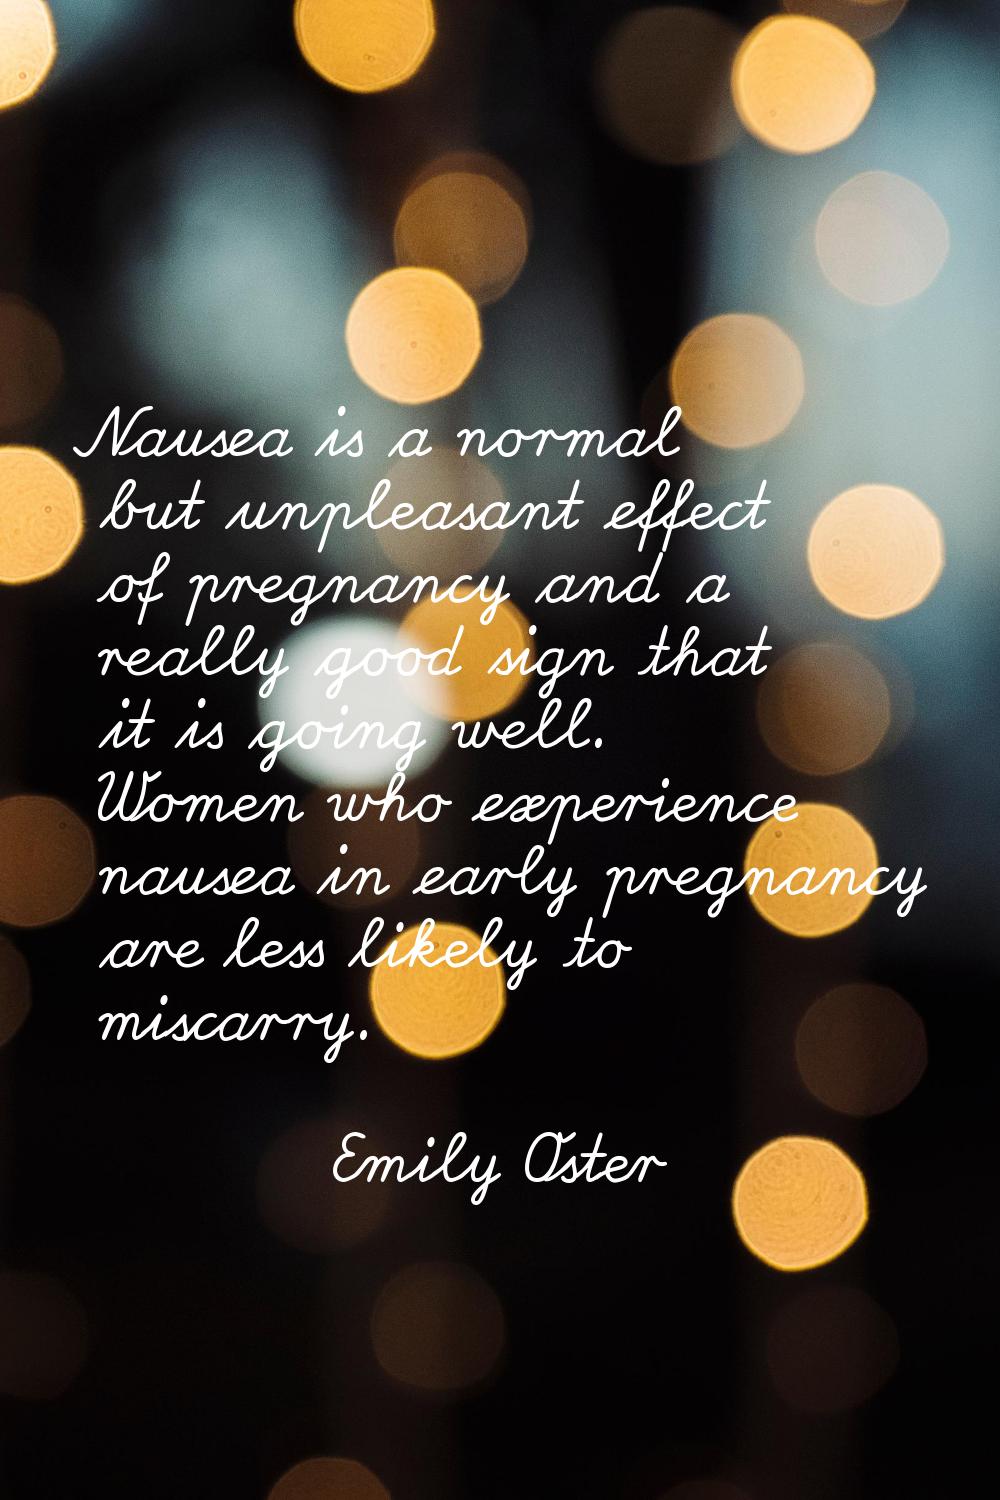 Nausea is a normal but unpleasant effect of pregnancy and a really good sign that it is going well.